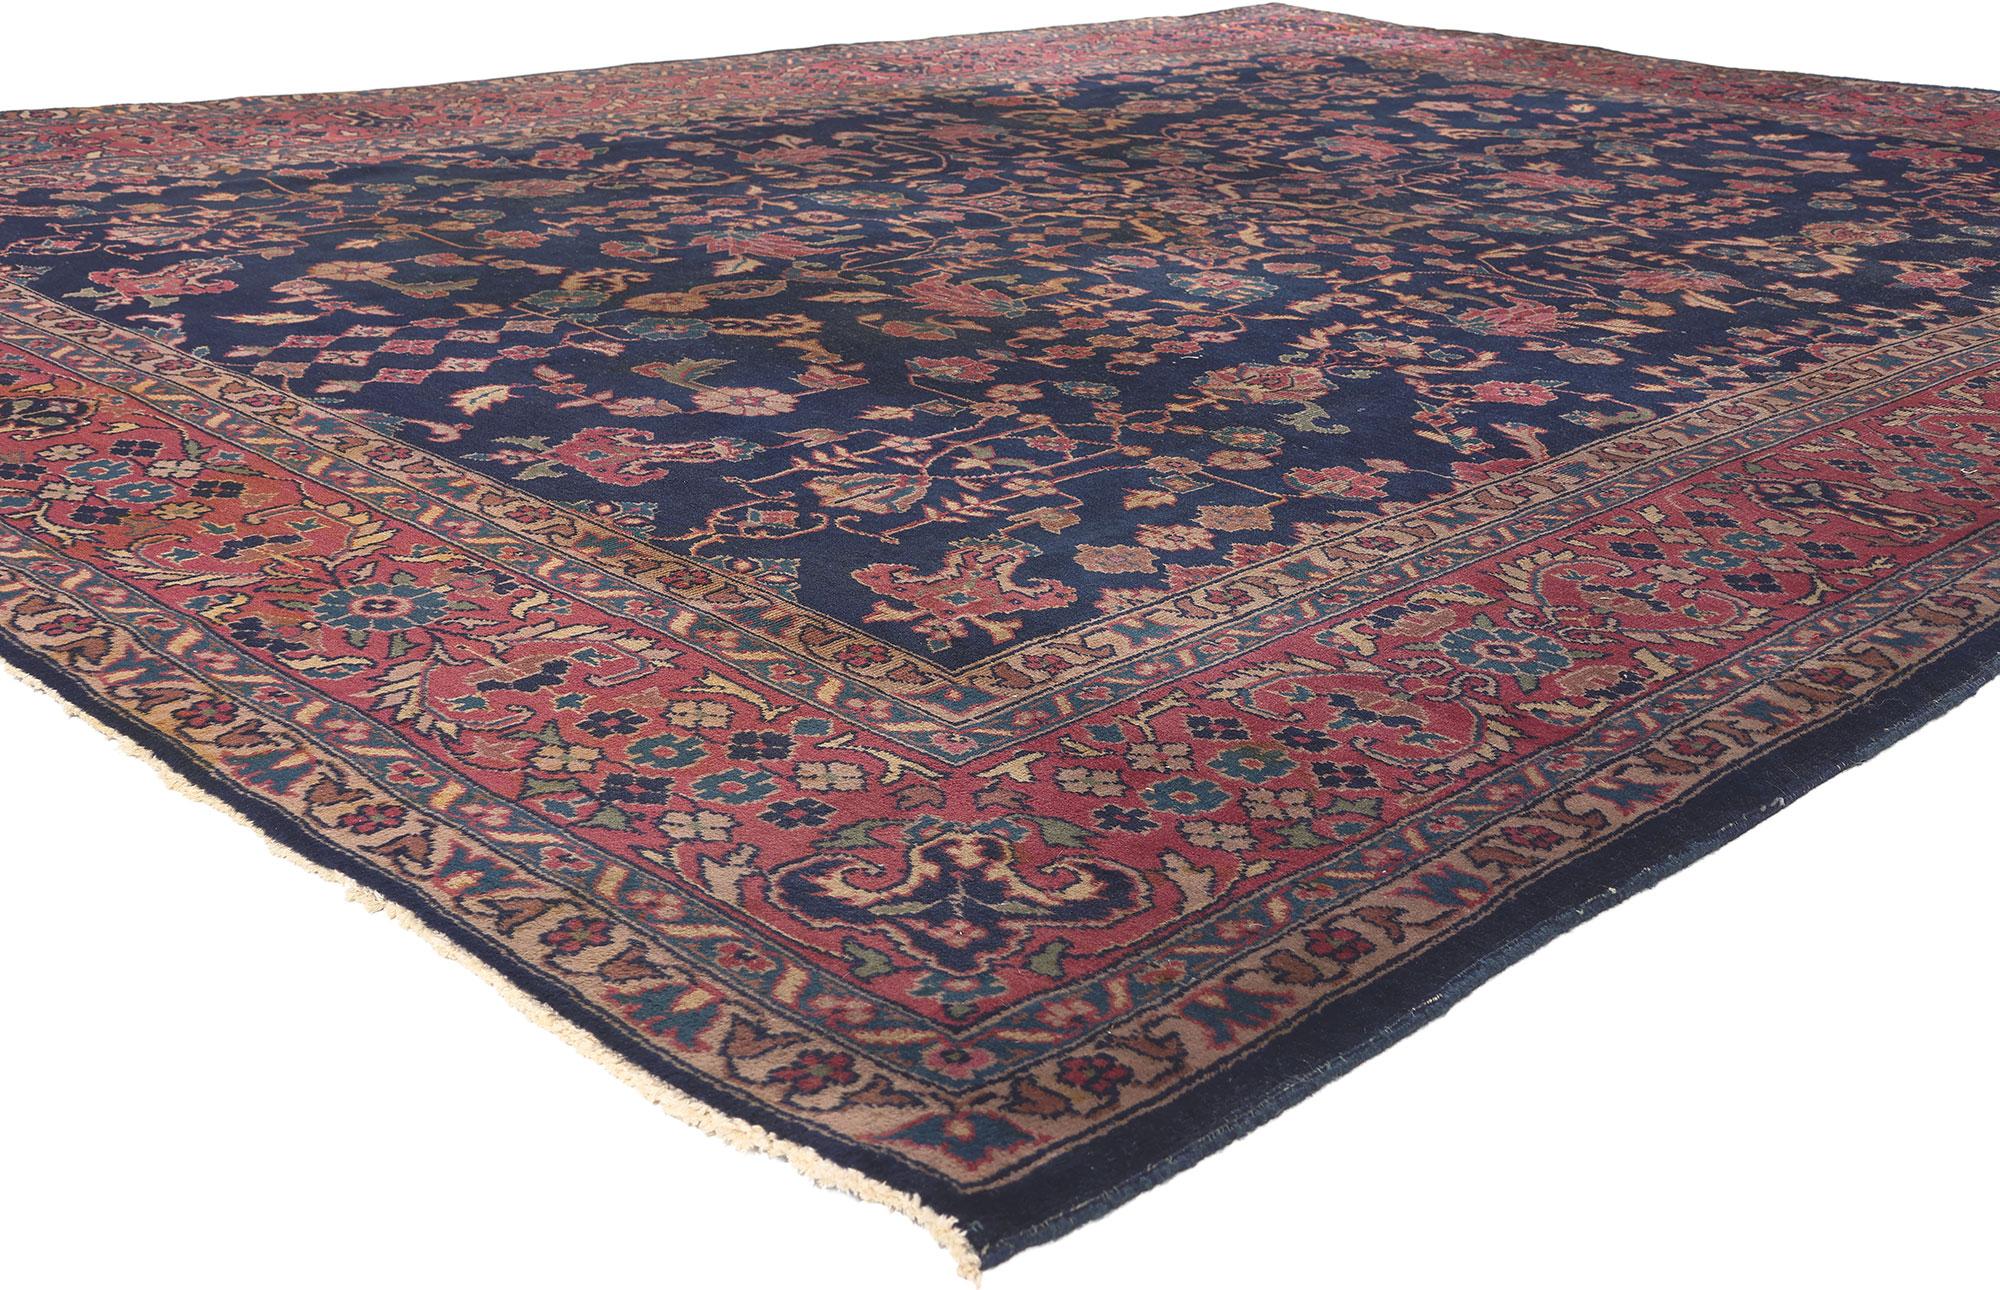 71941 Antique Turkish Sparta Rug, 08'09 x 11'09.
Sophisticated chic meets traditional sensibility in this antique Turkish Sparta rug. The intrinsic floral design and refined color palette woven into this piece work together creating a cozy, inviting